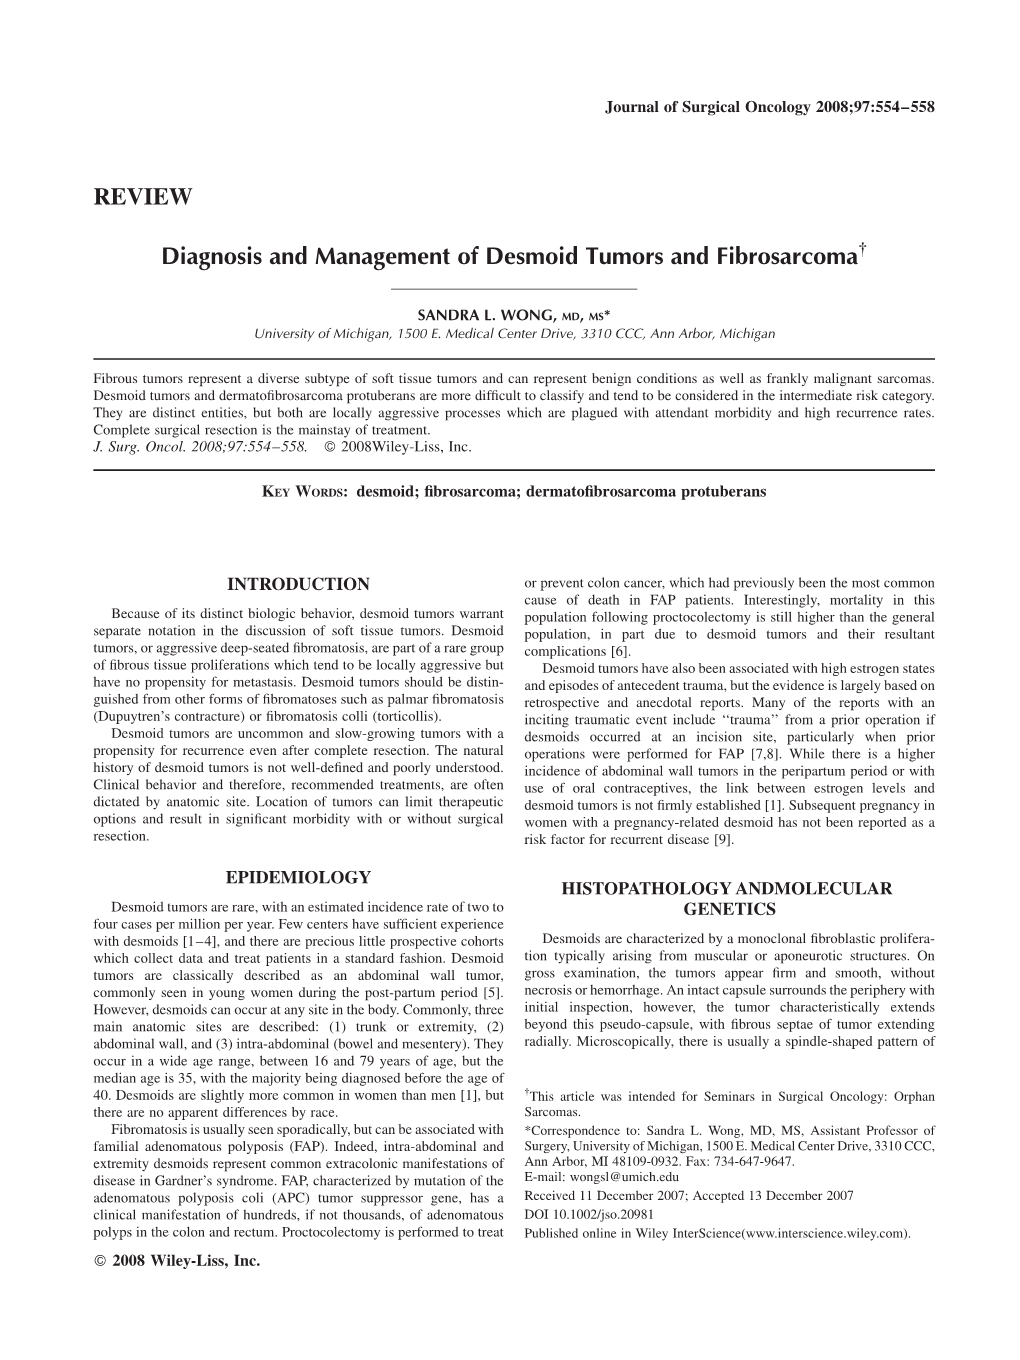 REVIEW Diagnosis and Management of Desmoid Tumors And